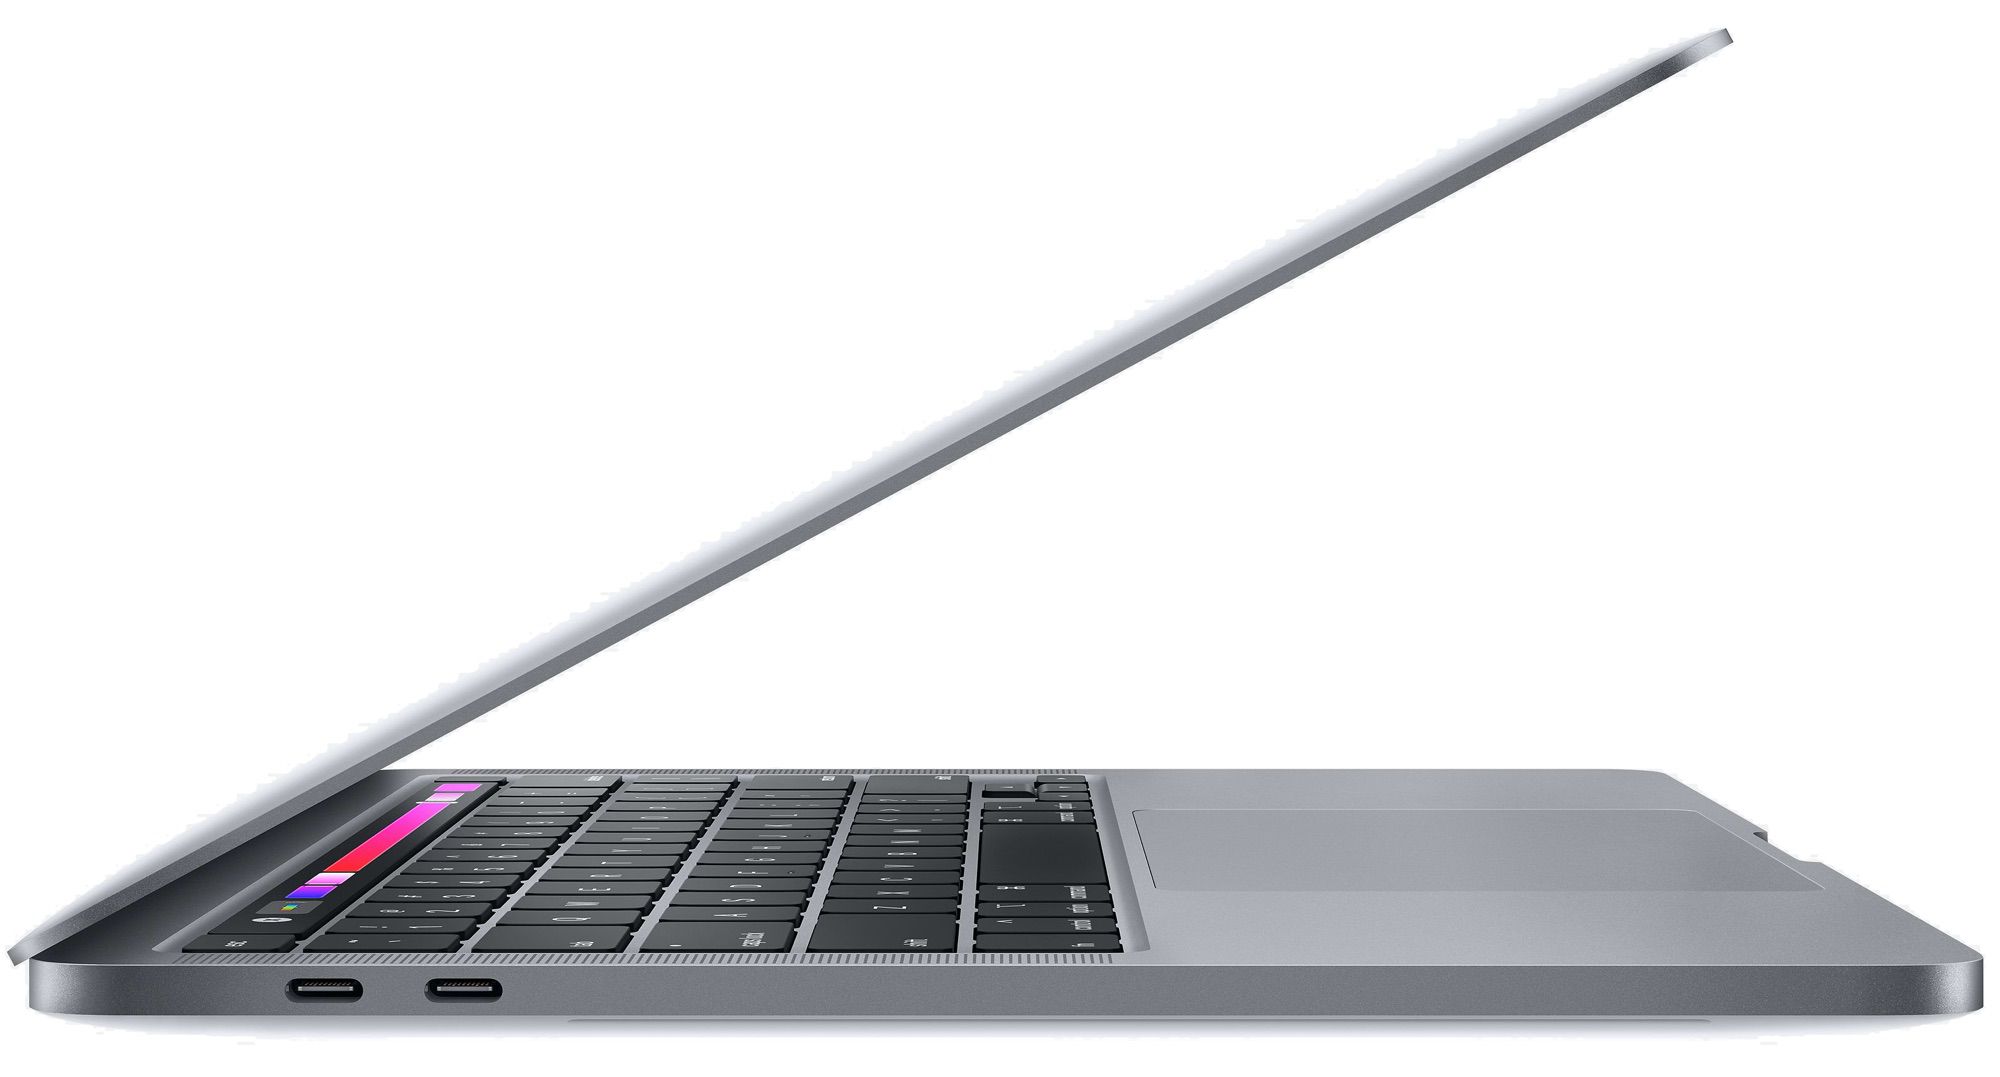 New Sealed MacBook Pro 13 inch With Touch Bar, M1 CPU Processor, 256GB SSD,  Apple Care, 2021